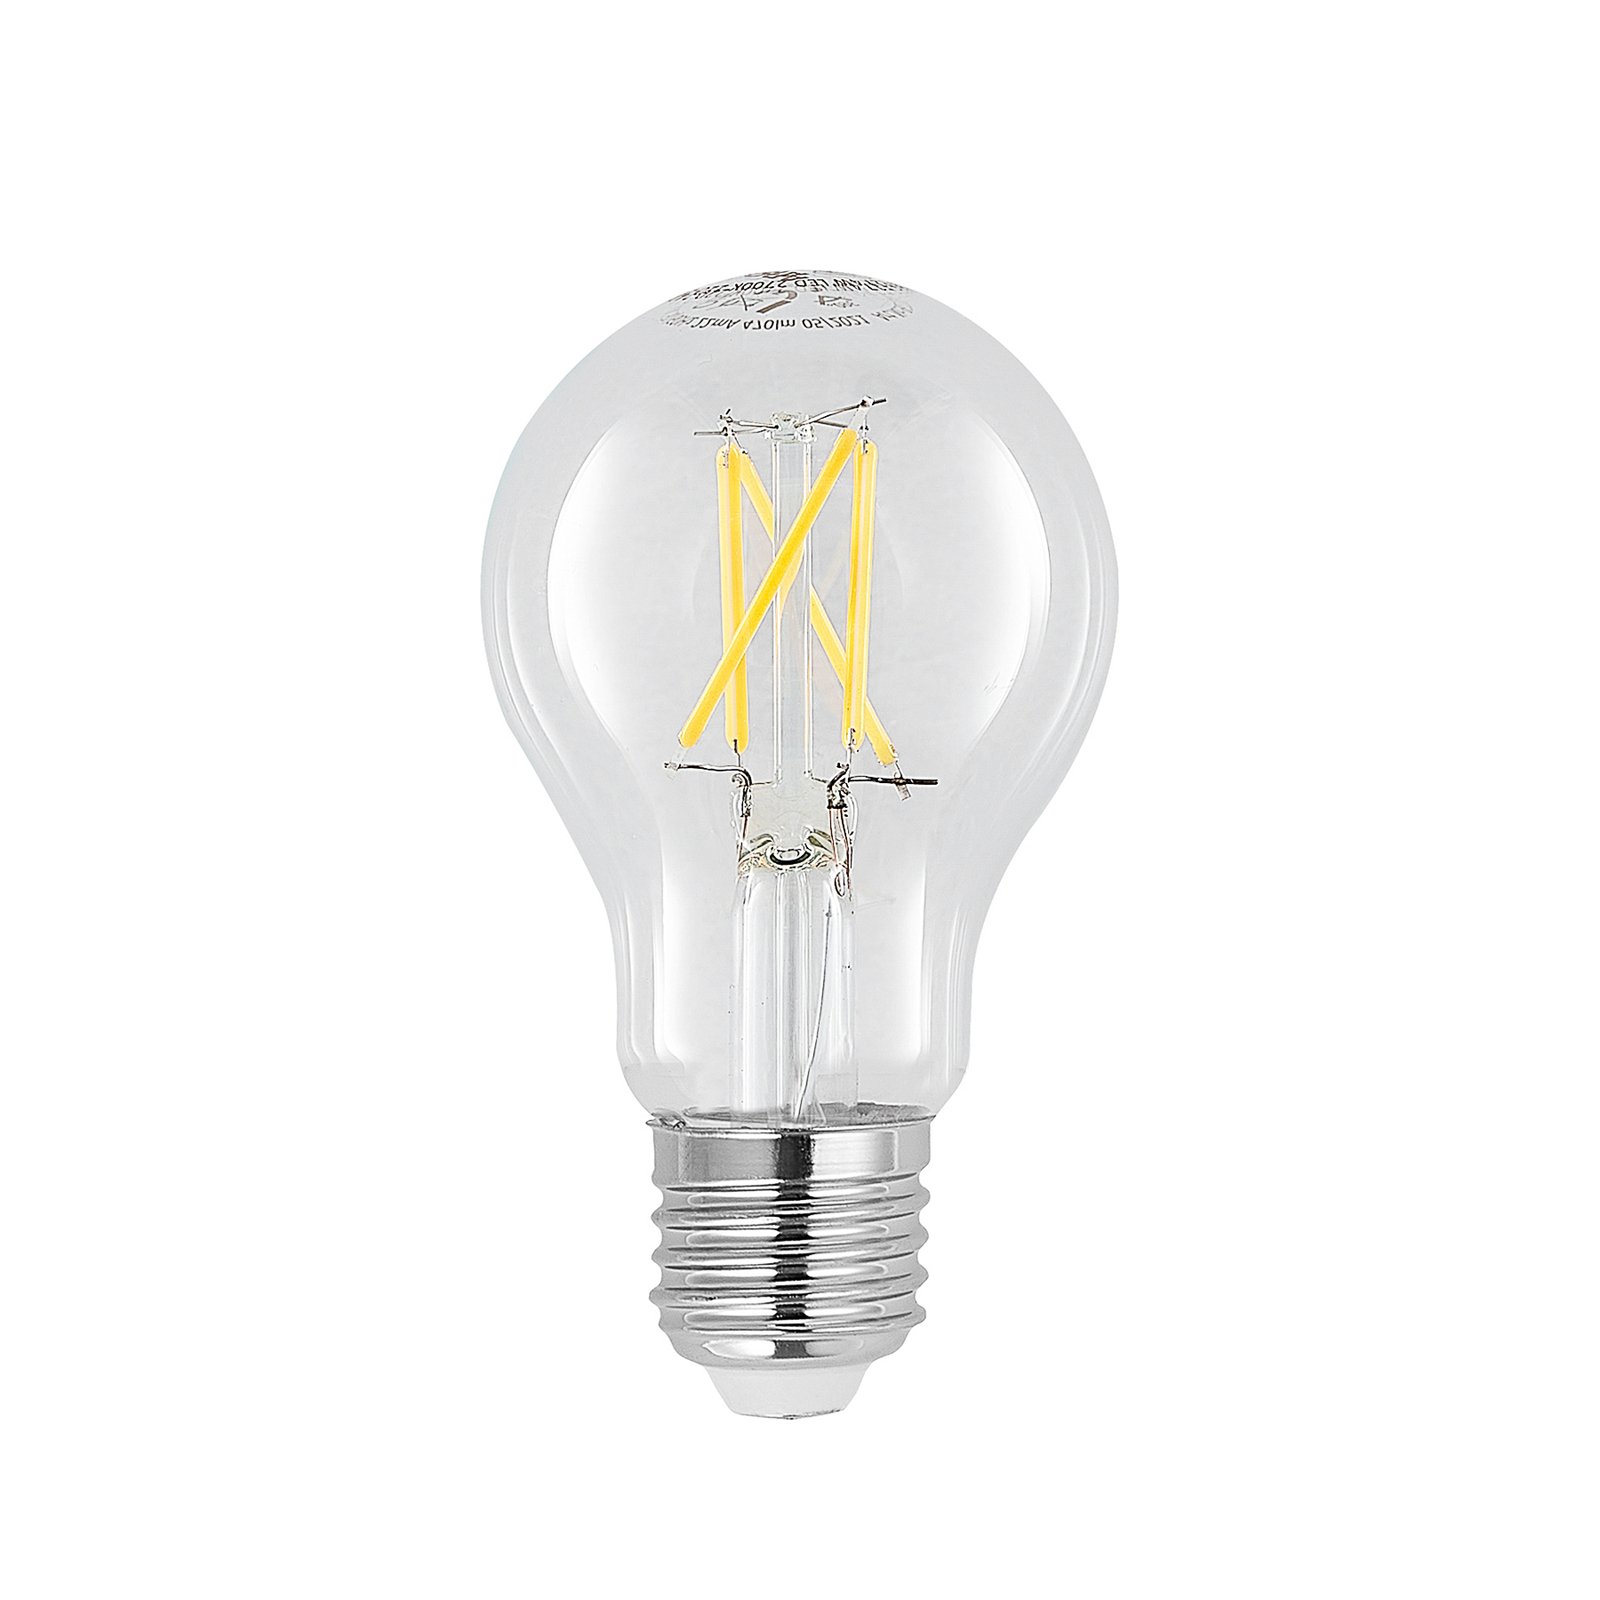 LED bulb E27 8W 2,700K filament dimmable clear 3x